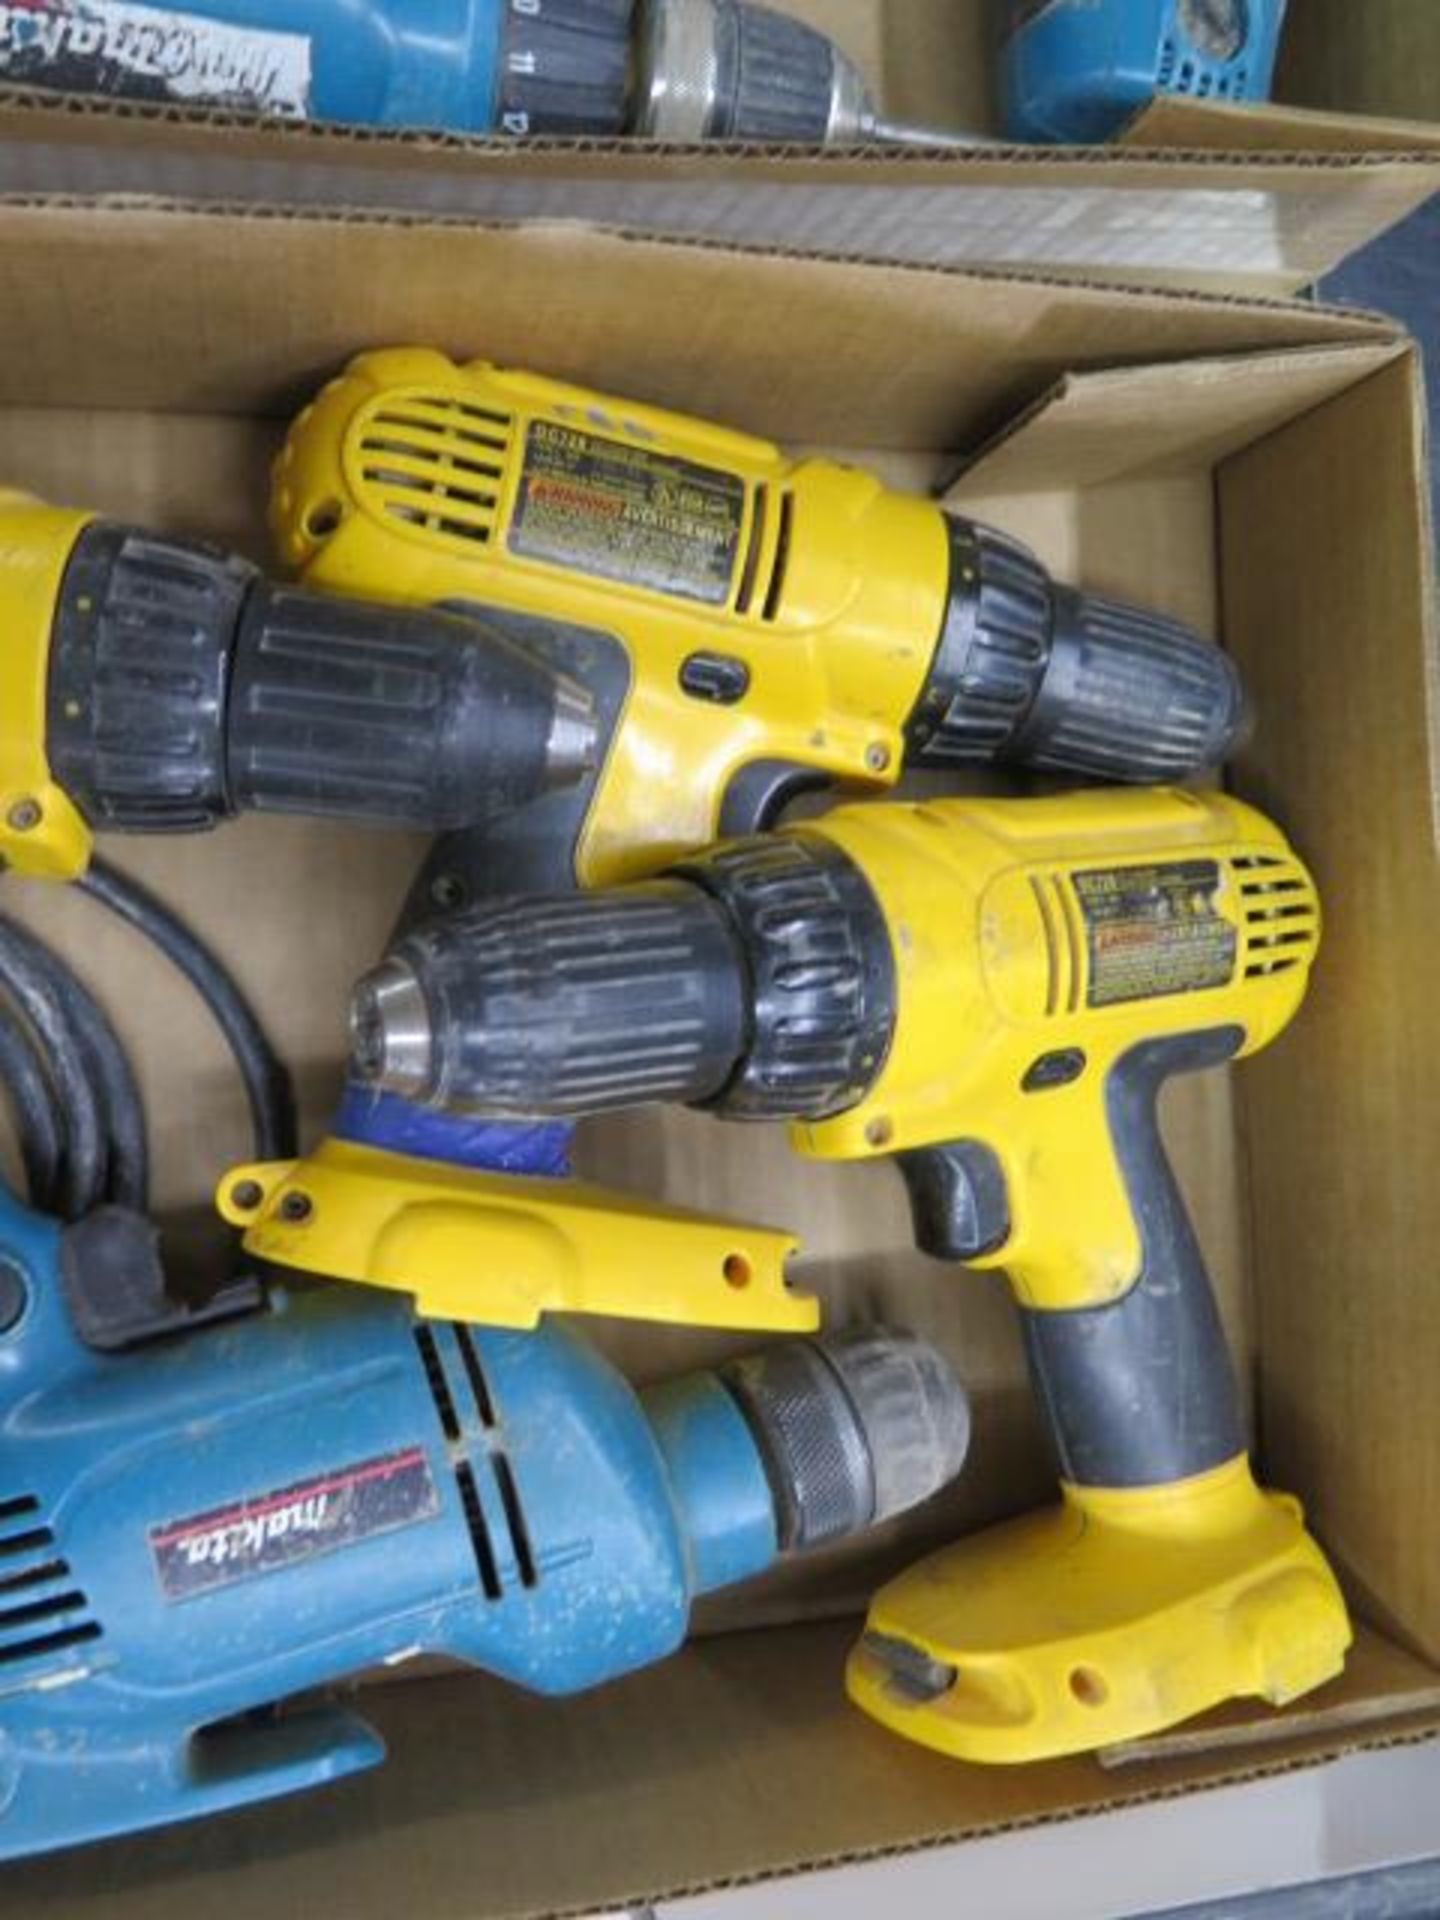 DeWalt 14.4Volt Cordless Drills (3) (NO CHARGER OR BARRERIES) and Makita Electric Drill (SOLD AS- - Bild 3 aus 4